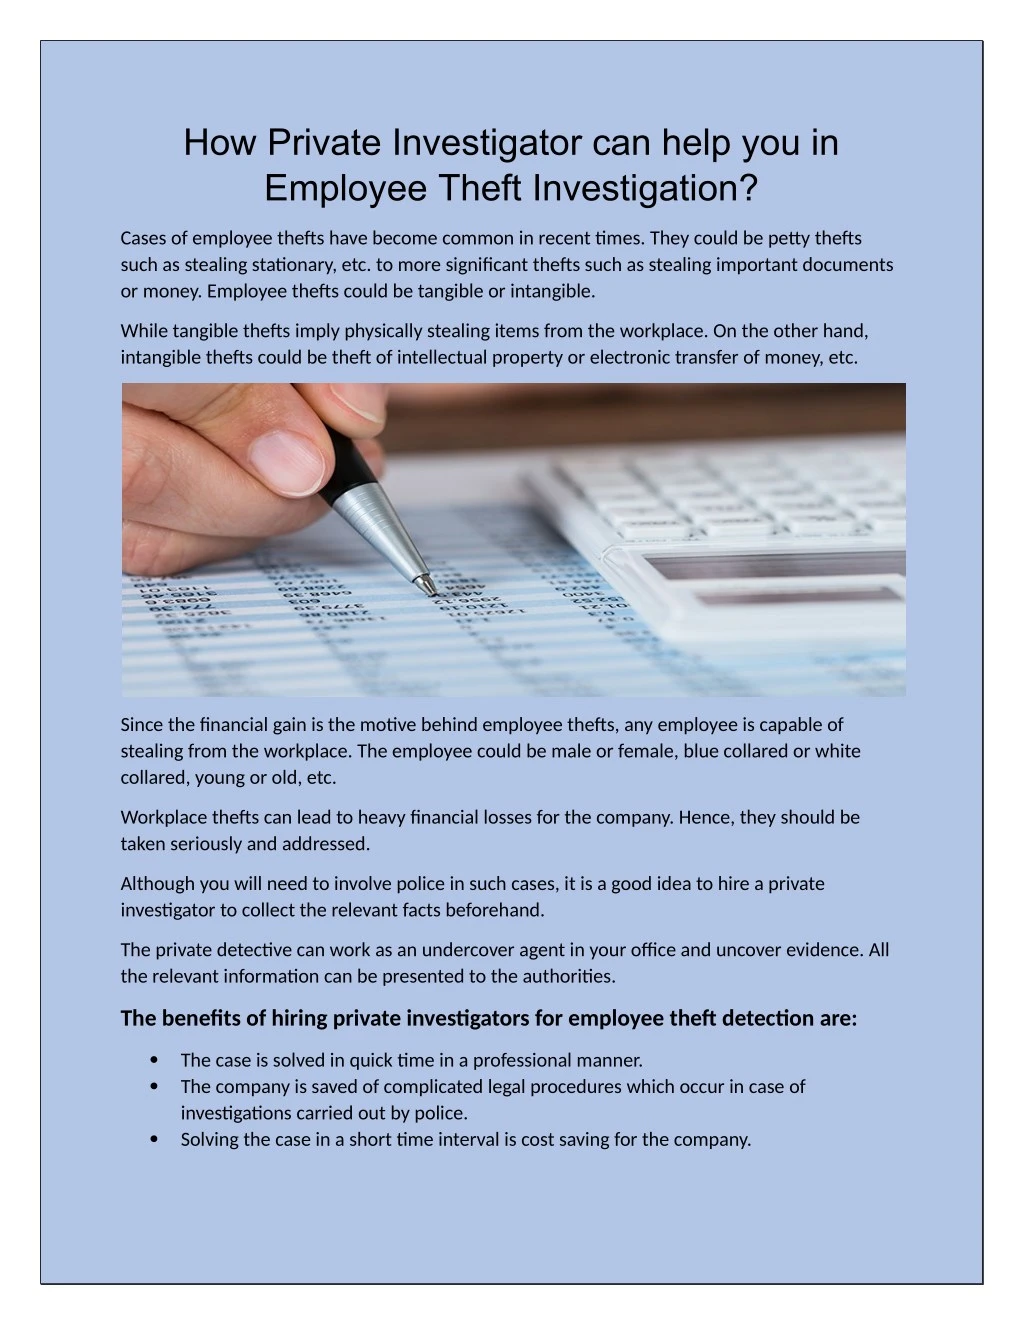 how private investigator can help you in employee